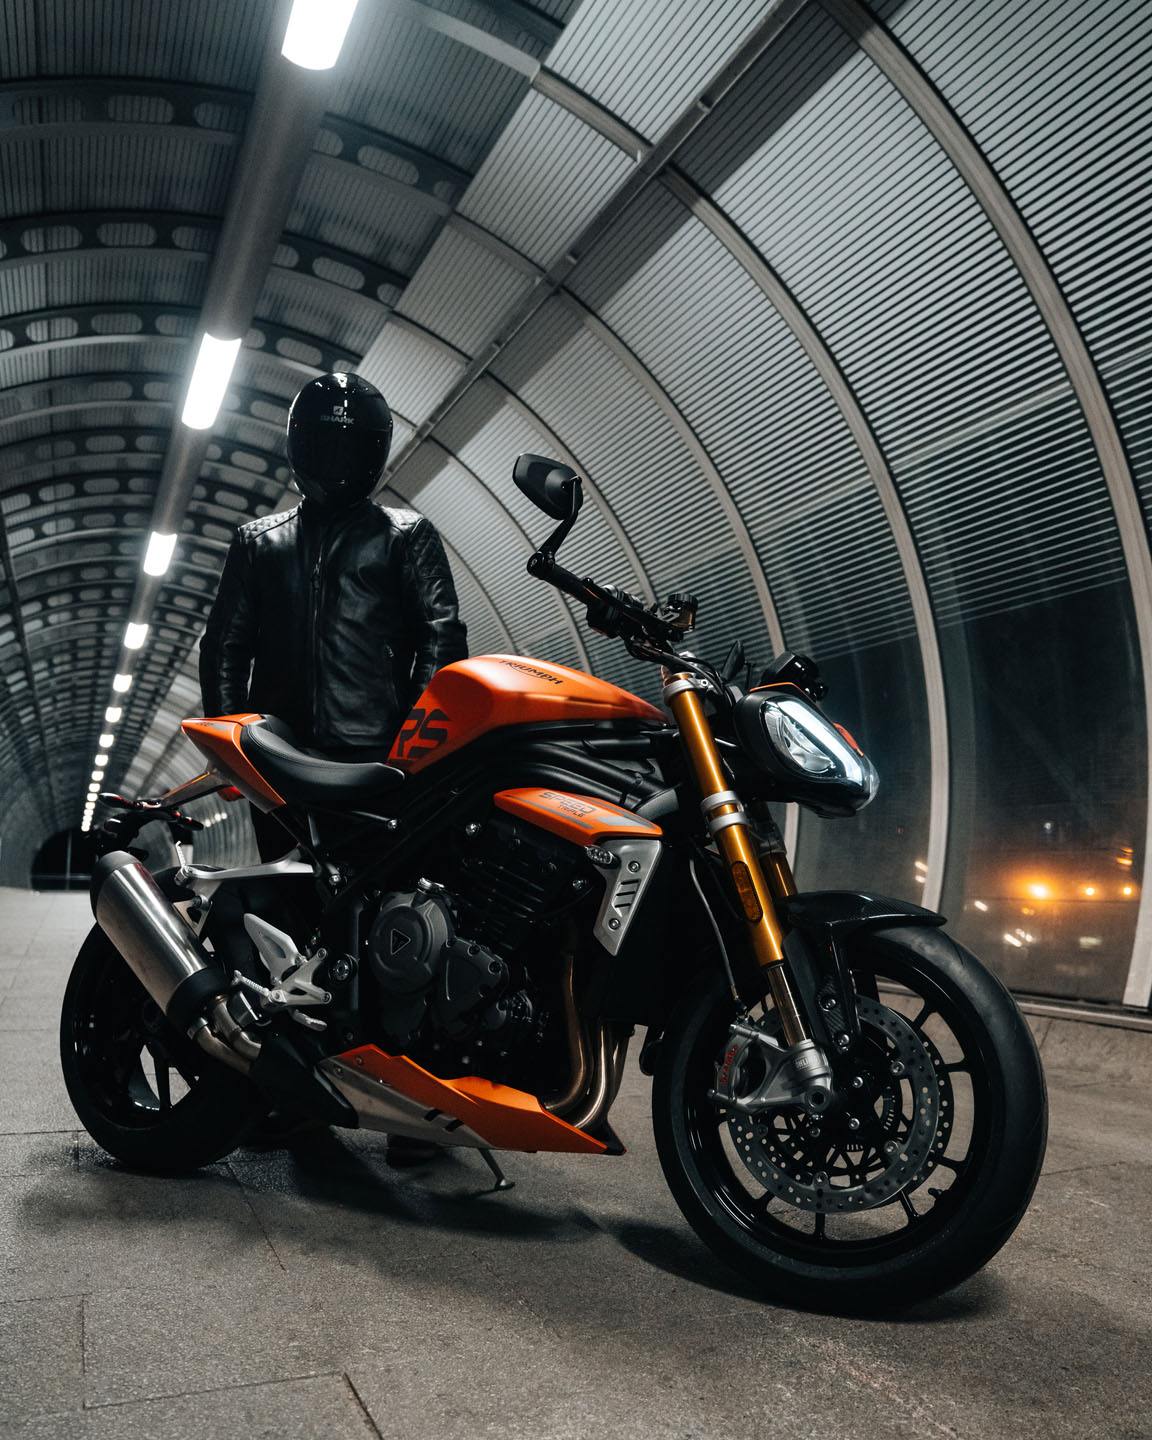 2023 Triumph Speed Triple 1200 RS in New Haven, Connecticut - Photo 7